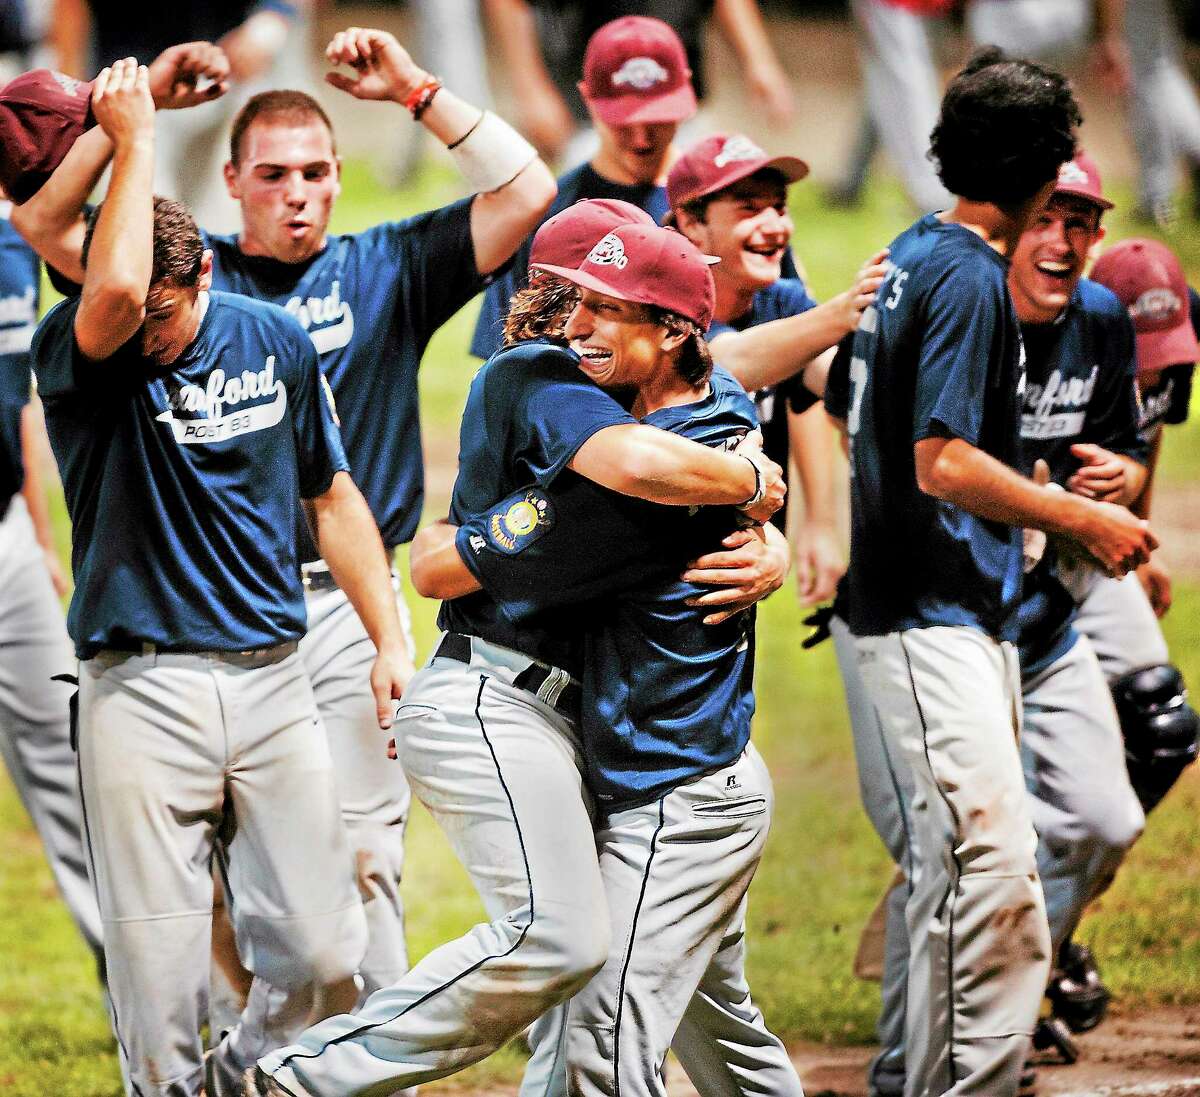 Branford celebrates its 12-2 win over Worcester, Mass., in the American Legion Northeast Regional championship game on Monday in Middletown.